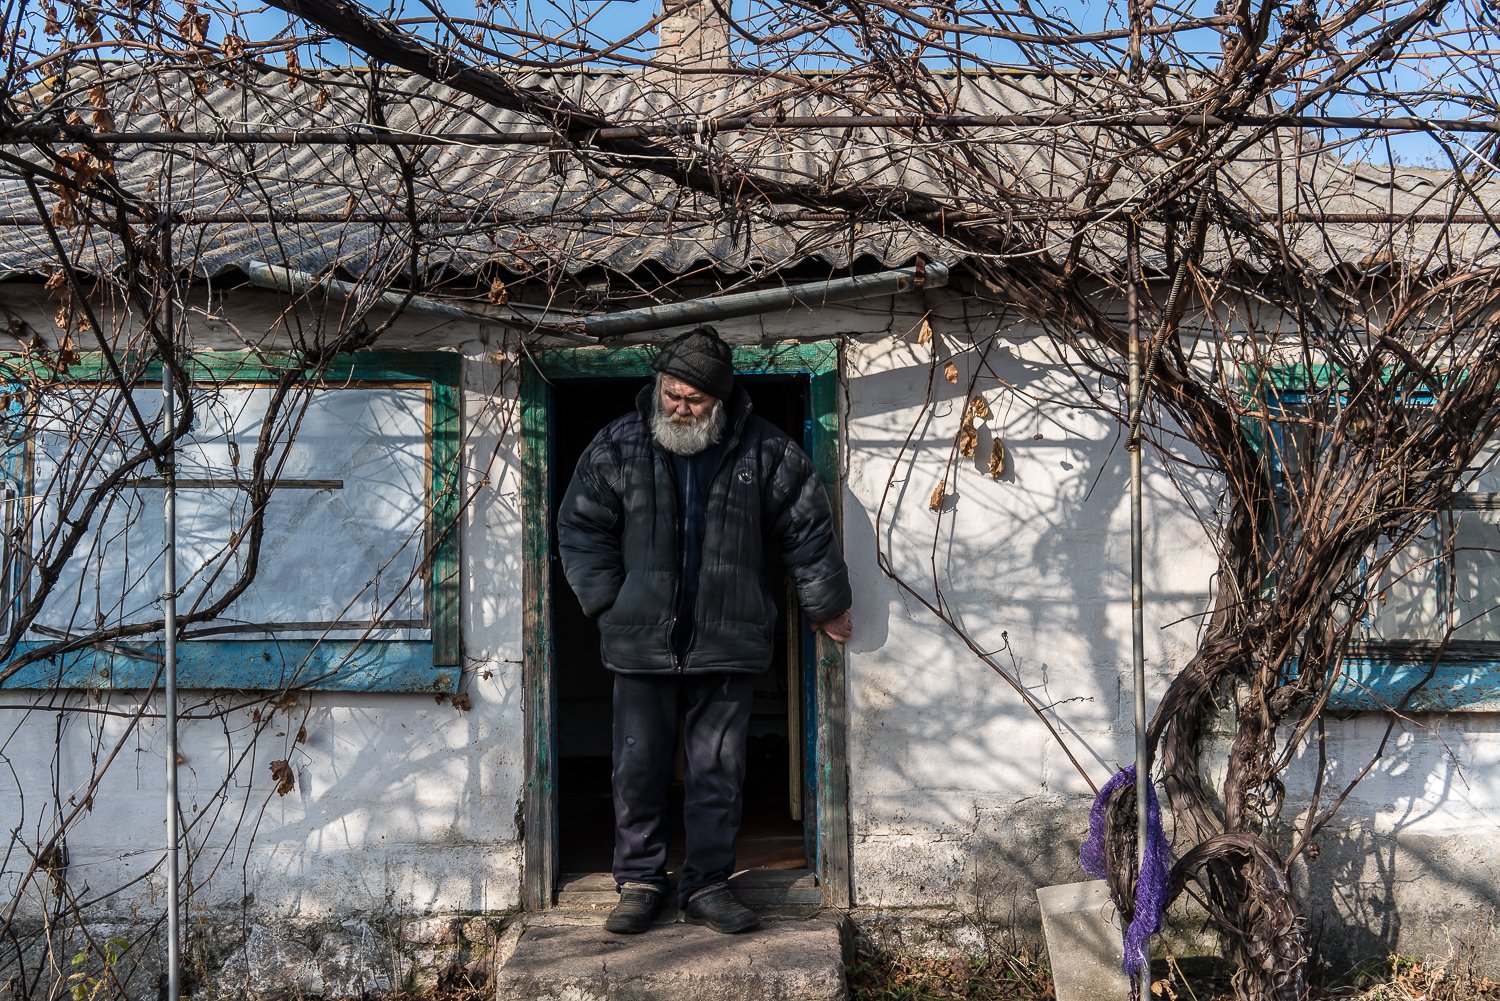  Khalid Yakubov, 63, who is blind and suffers from diabetes, in the doorway of his home after a visit from charity workers on Friday, November 5, 2021 in Hranitne, Ukraine. The town is located on the front line of Ukraine's war with Russian-backed se